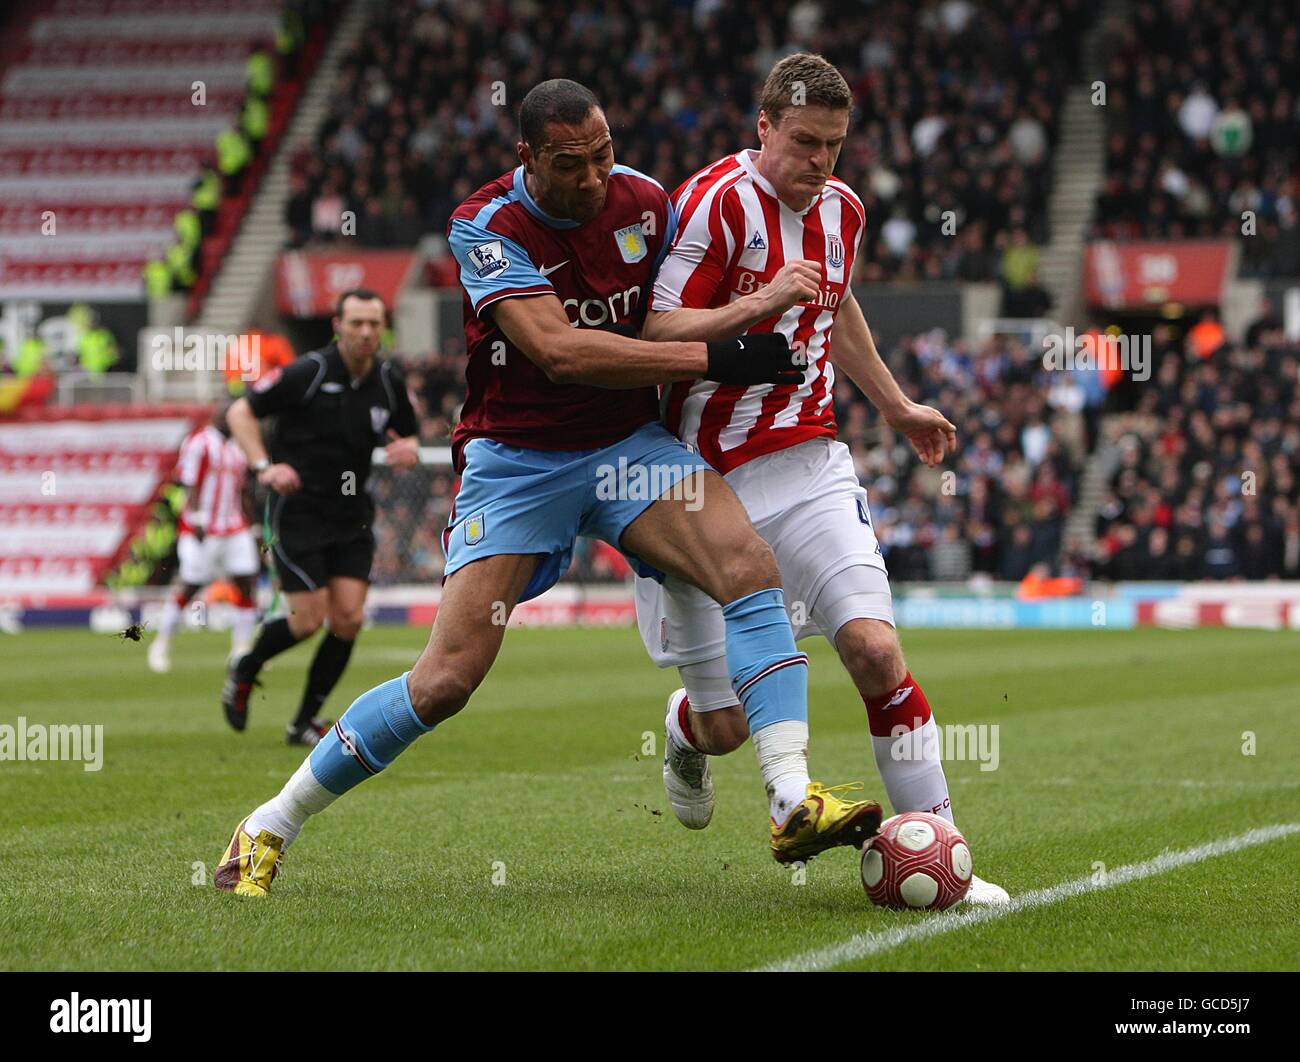 Aston Villa's John Carew (left) and Stoke City's Danny Collins (rigth) battle for the ball. Stock Photo